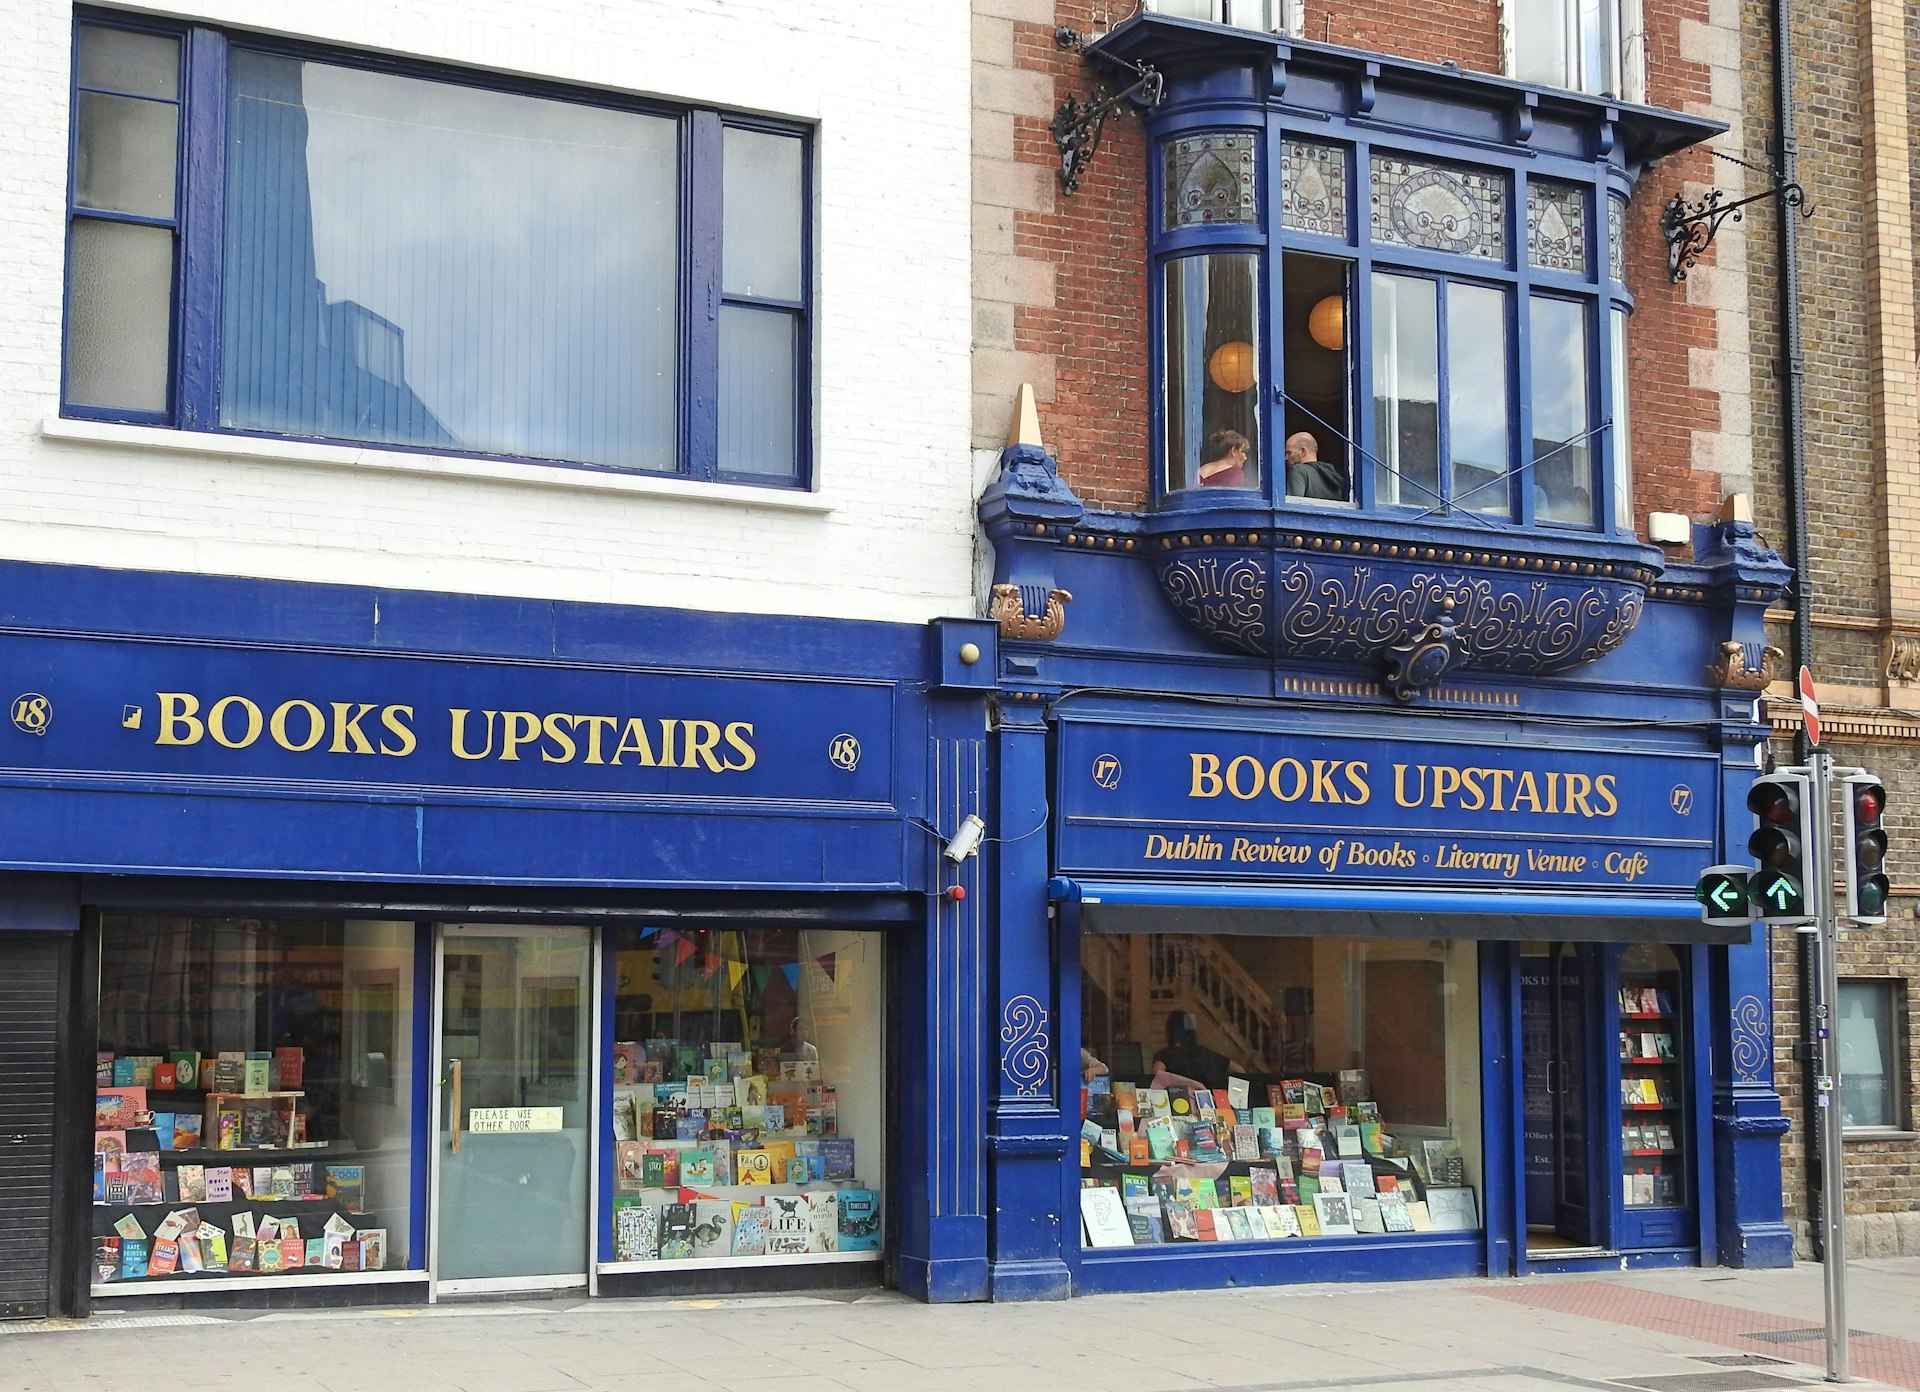 The blue fascade of a bookstore titled "Books Upstairs"